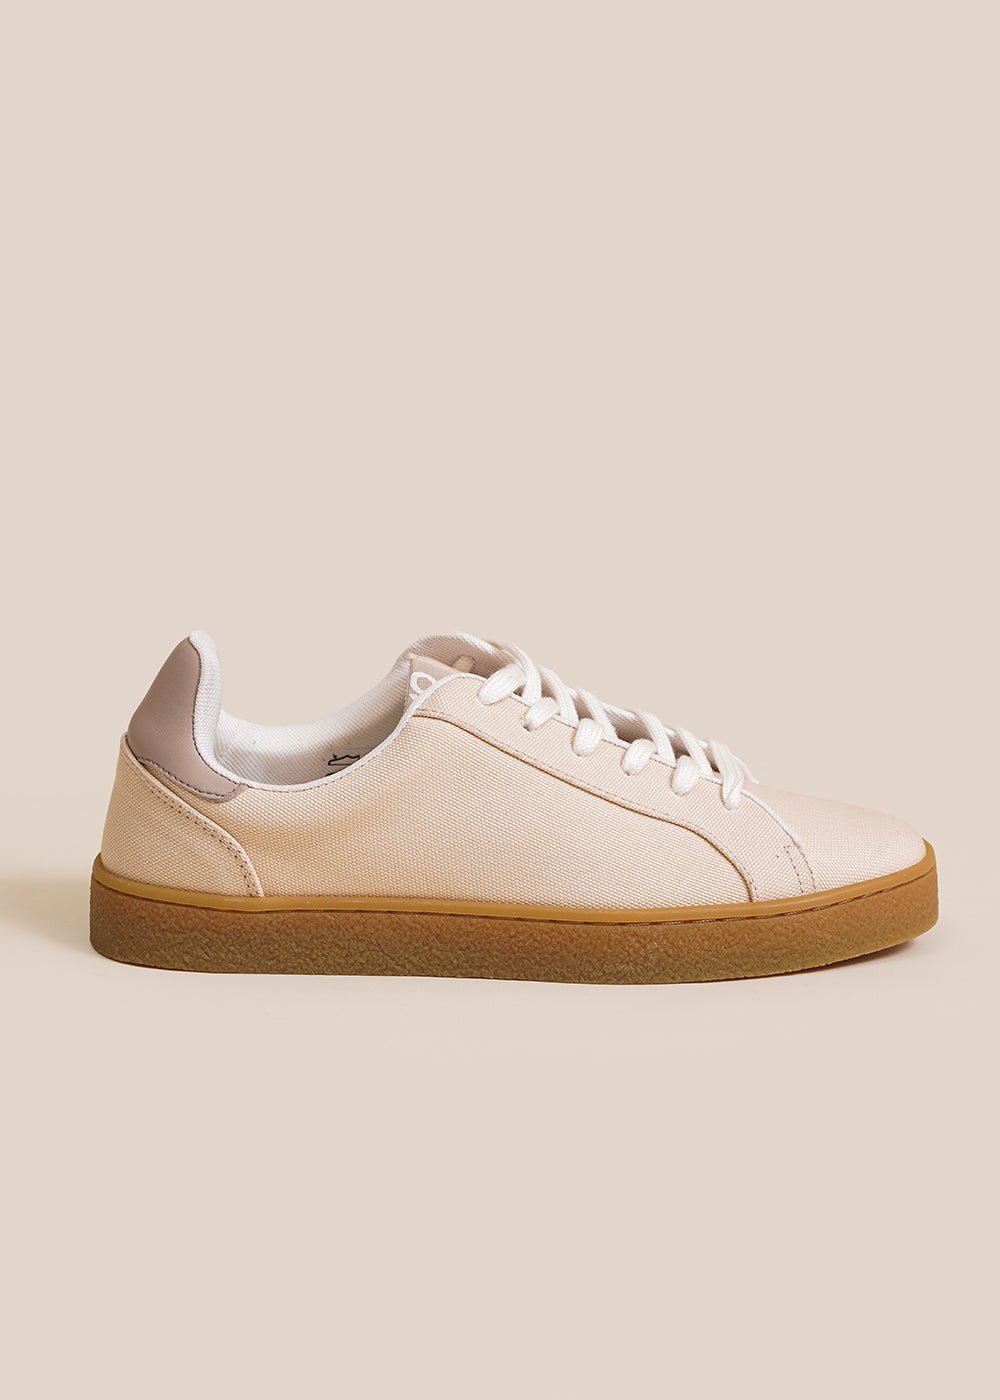 GOOD NEWS Oatmeal Venus Sneakers - New Classics Studios Sustainable Ethical Fashion Canada